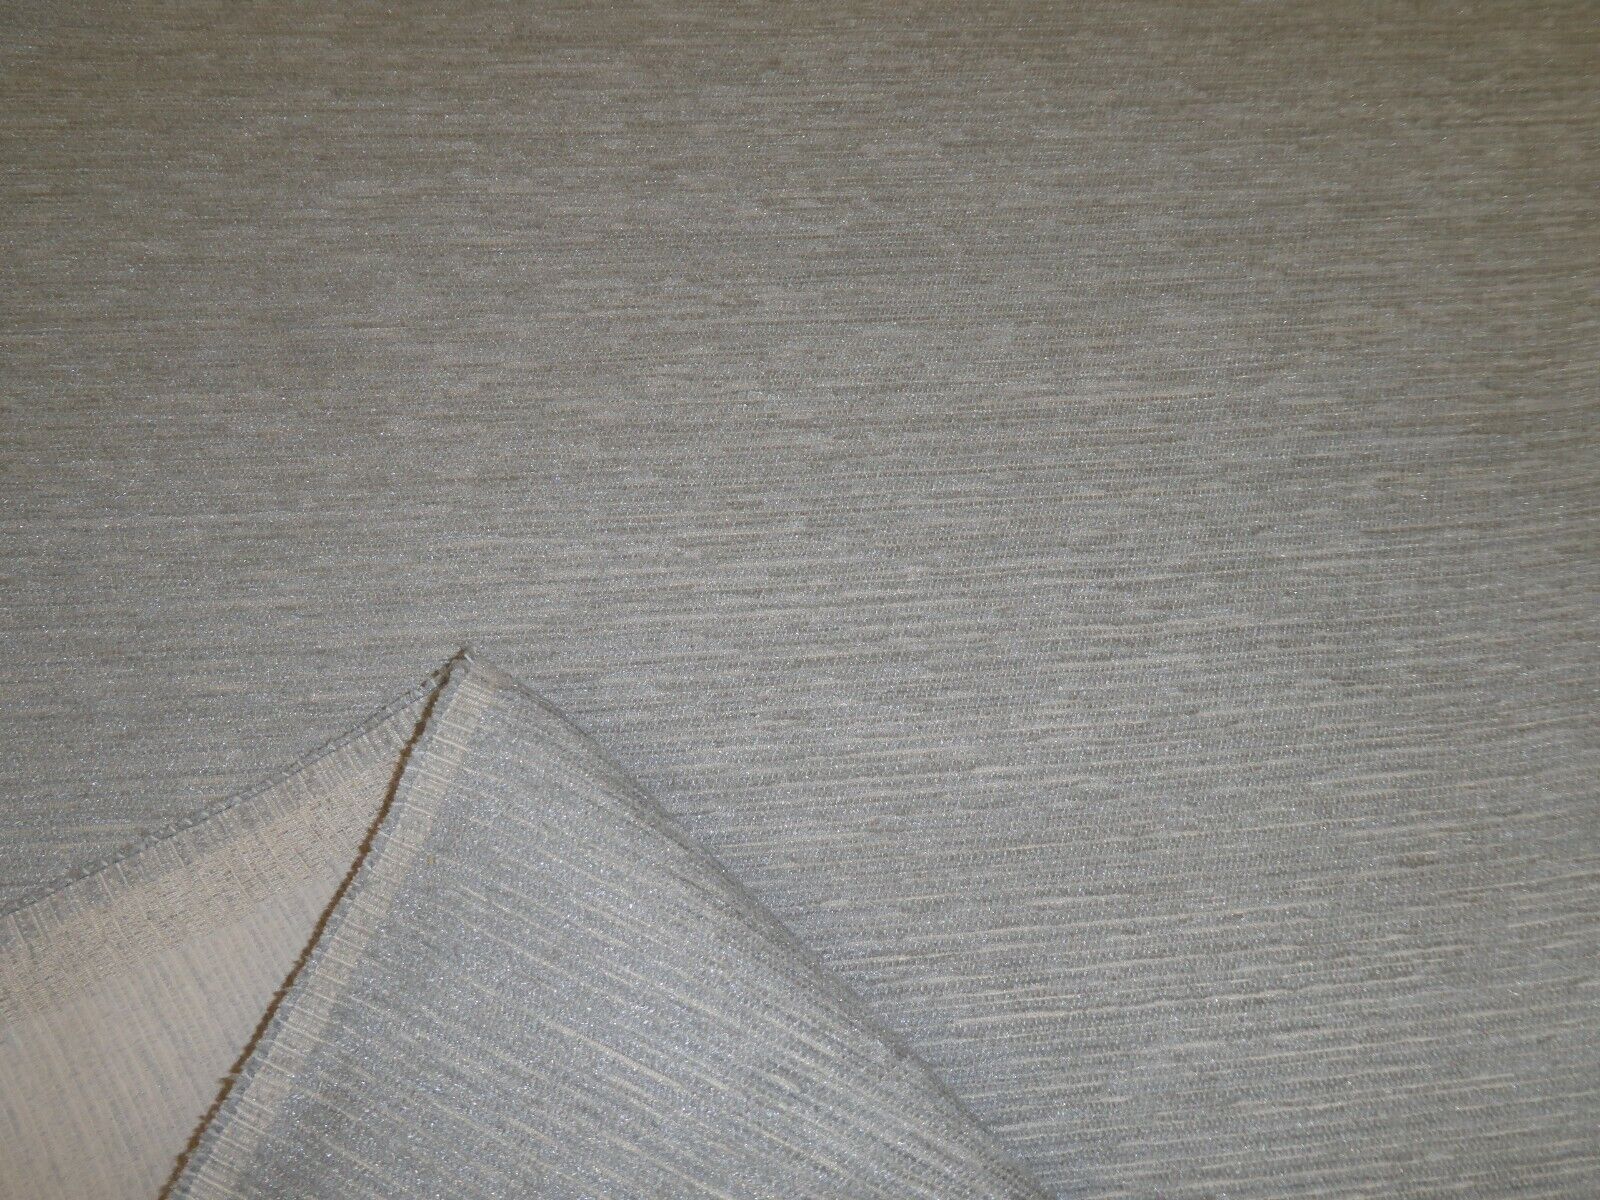 Mascot Bisque Cream Textured Chenille Upholstery Fabric By The Yard